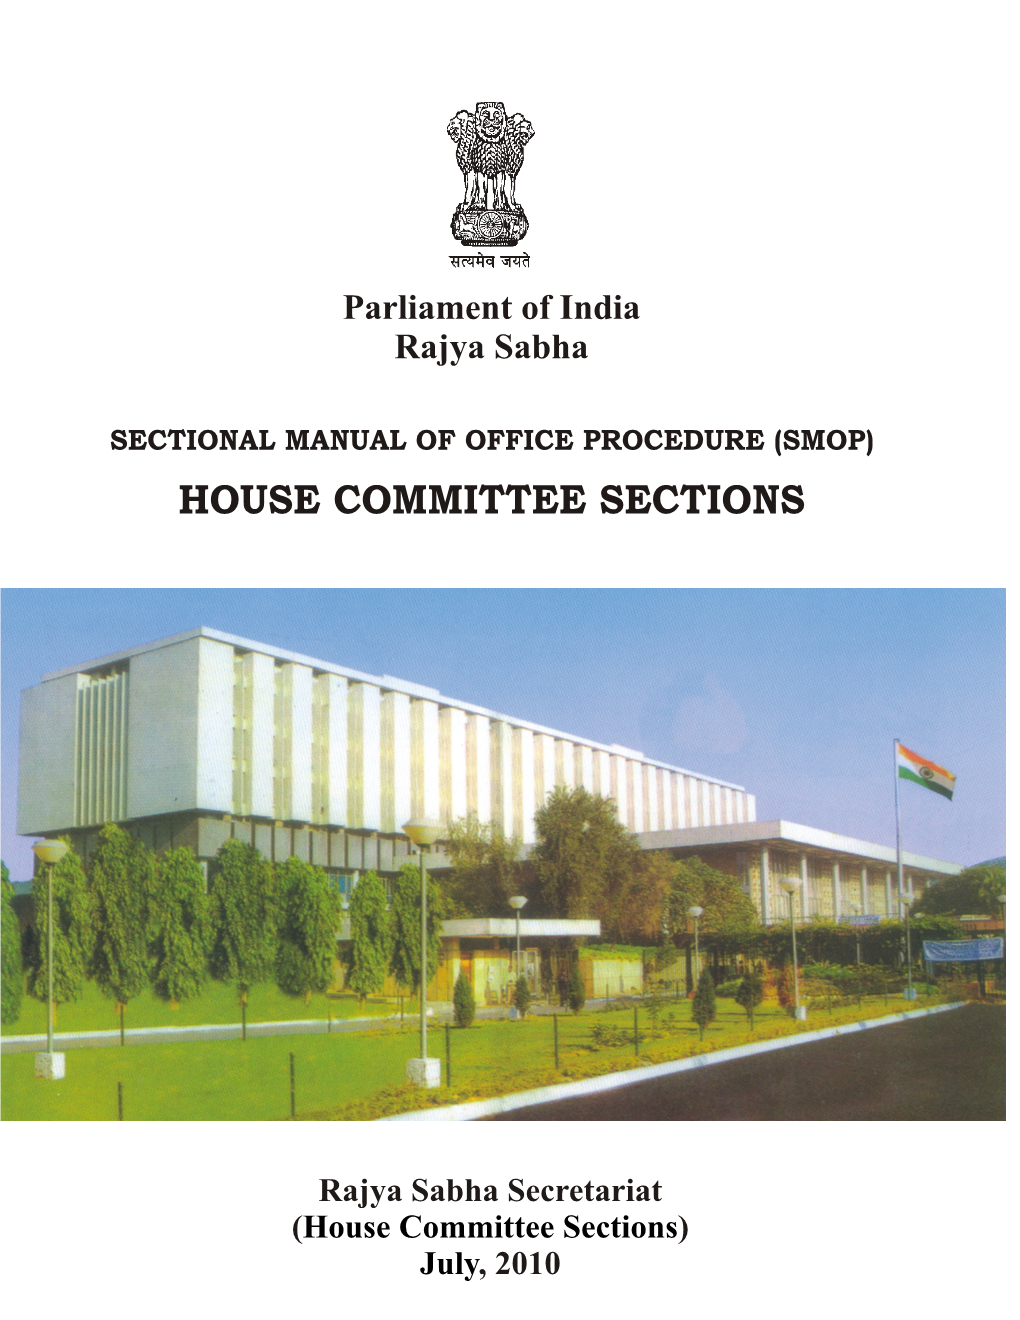 House Committee Sections